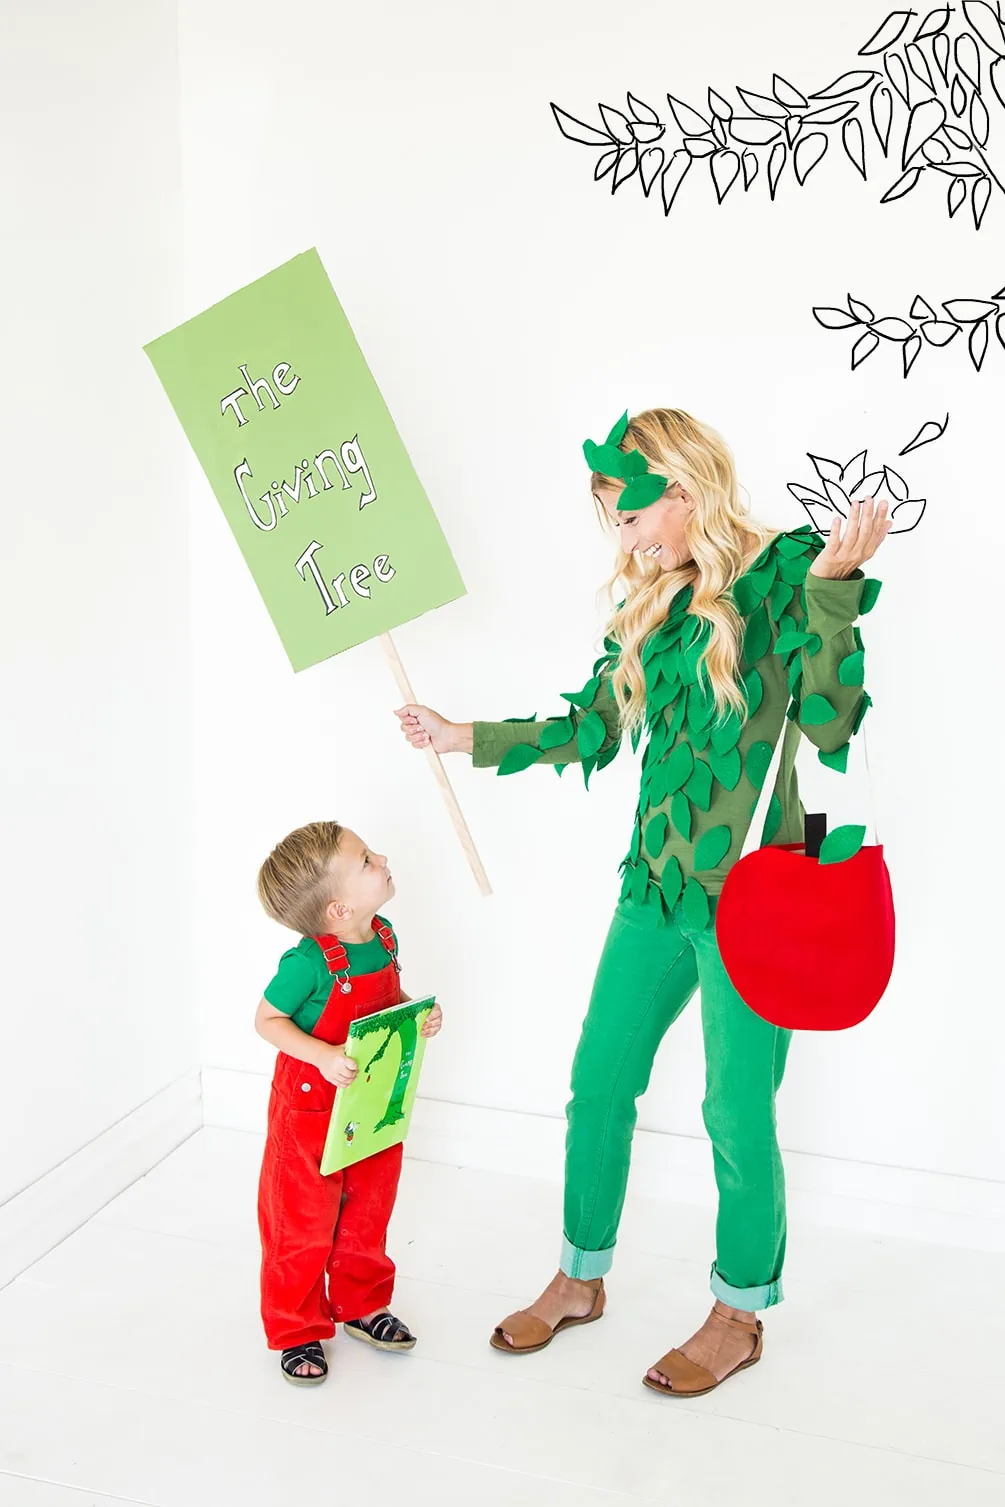 A mom wearing a green outfit with leaves and holding a felt apple bag stands next to her child in red overalls. They're dressed as the Giving Tree.